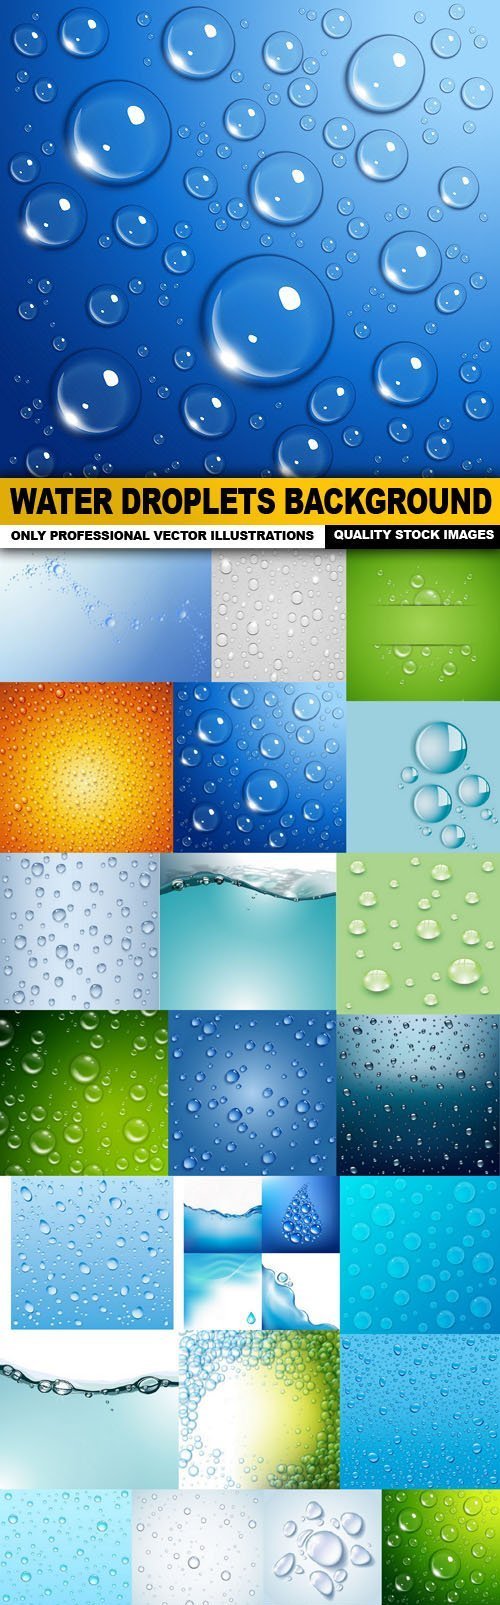 Water Droplets Background - 25 Vector